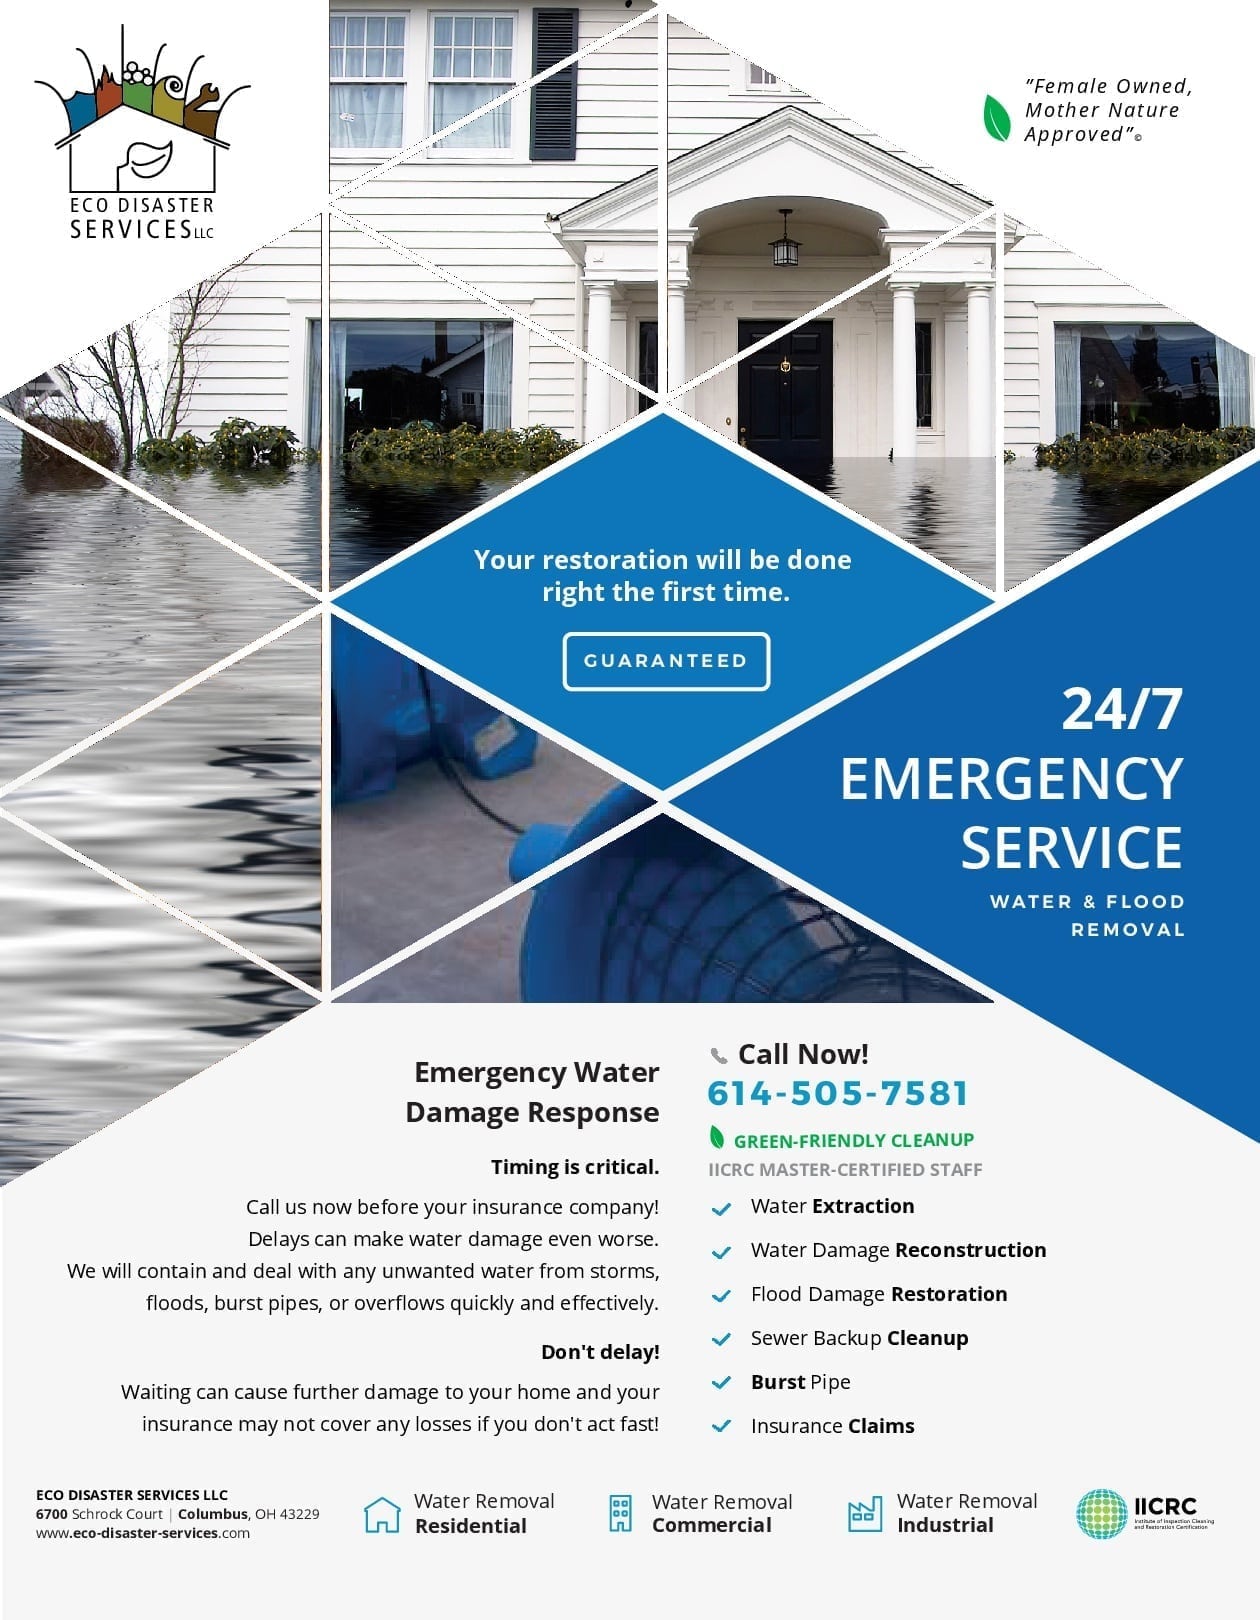 Water damage services